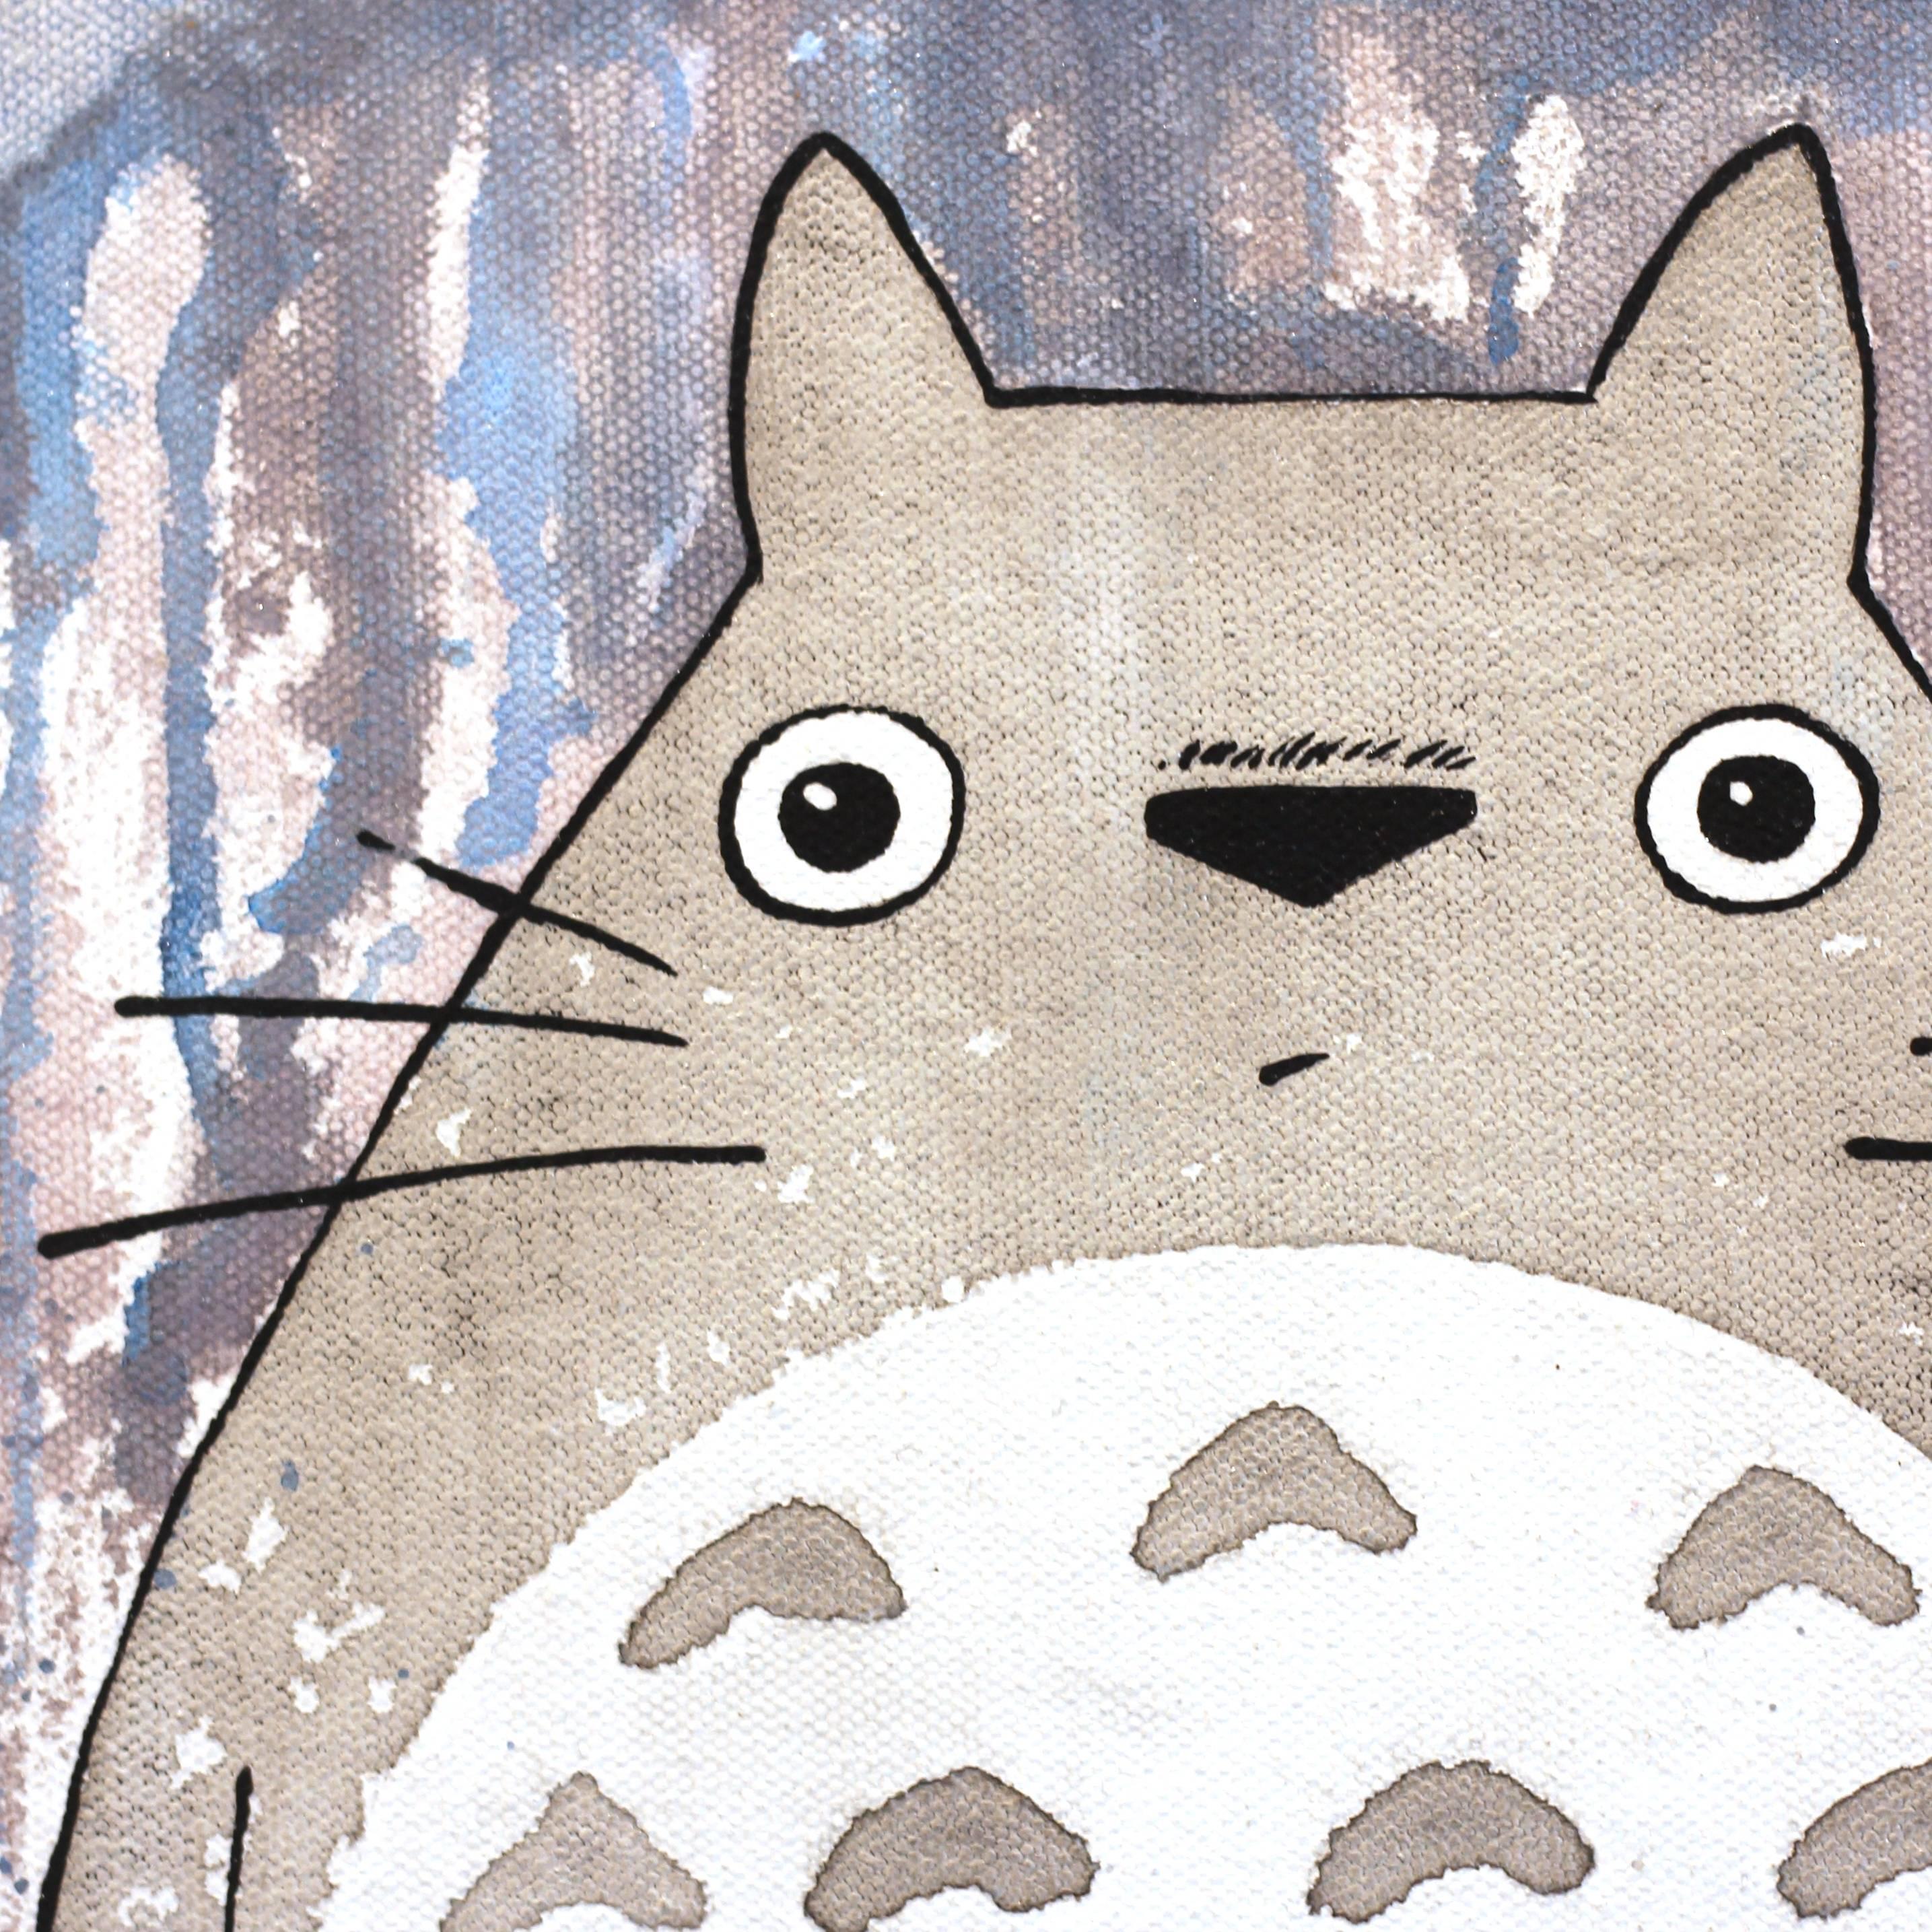 Totoro - Pop Art Painting by Courtney Raney